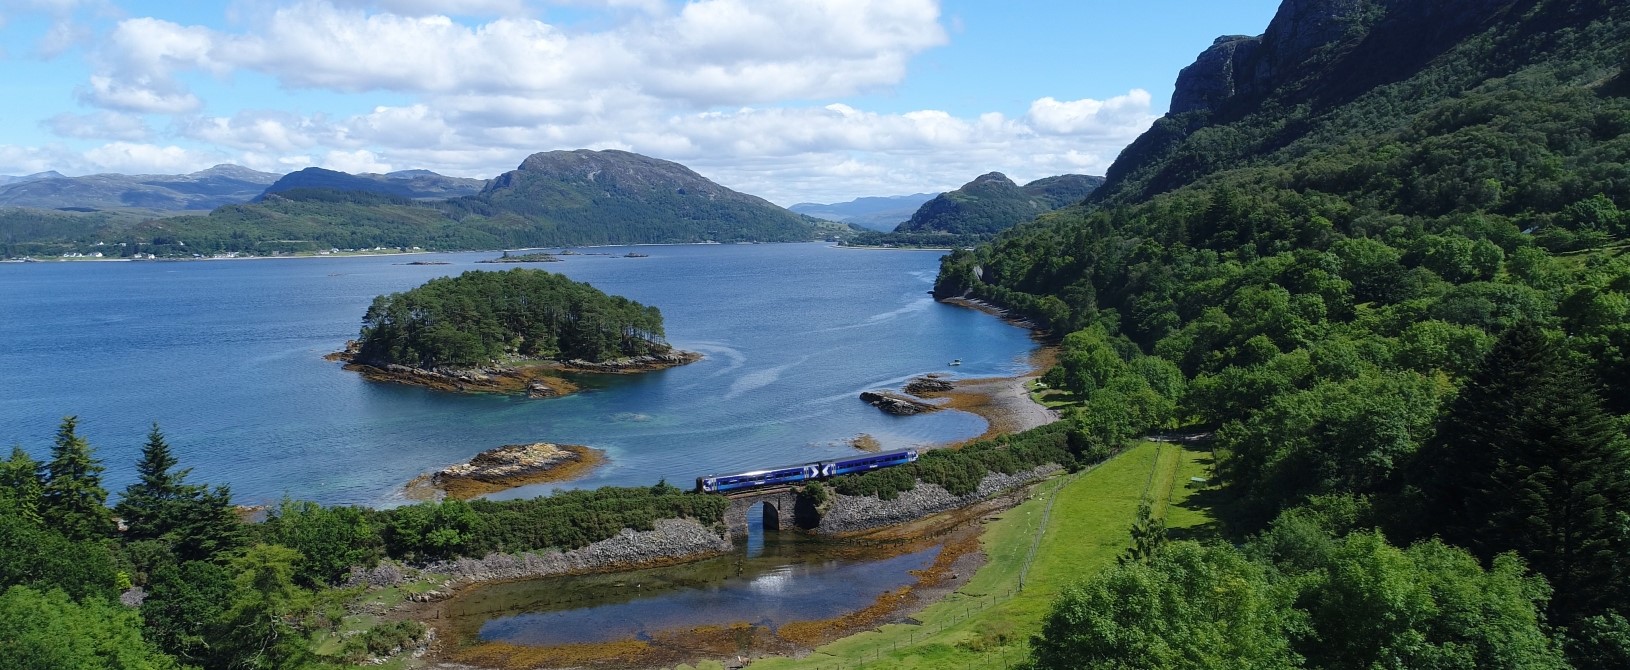 West Highland Line that runs from Fort William to Mallaig and, what is more, our Lochs and Glens guests can experience this spectacular journey on a train hauled by an iconic steam locomotive.